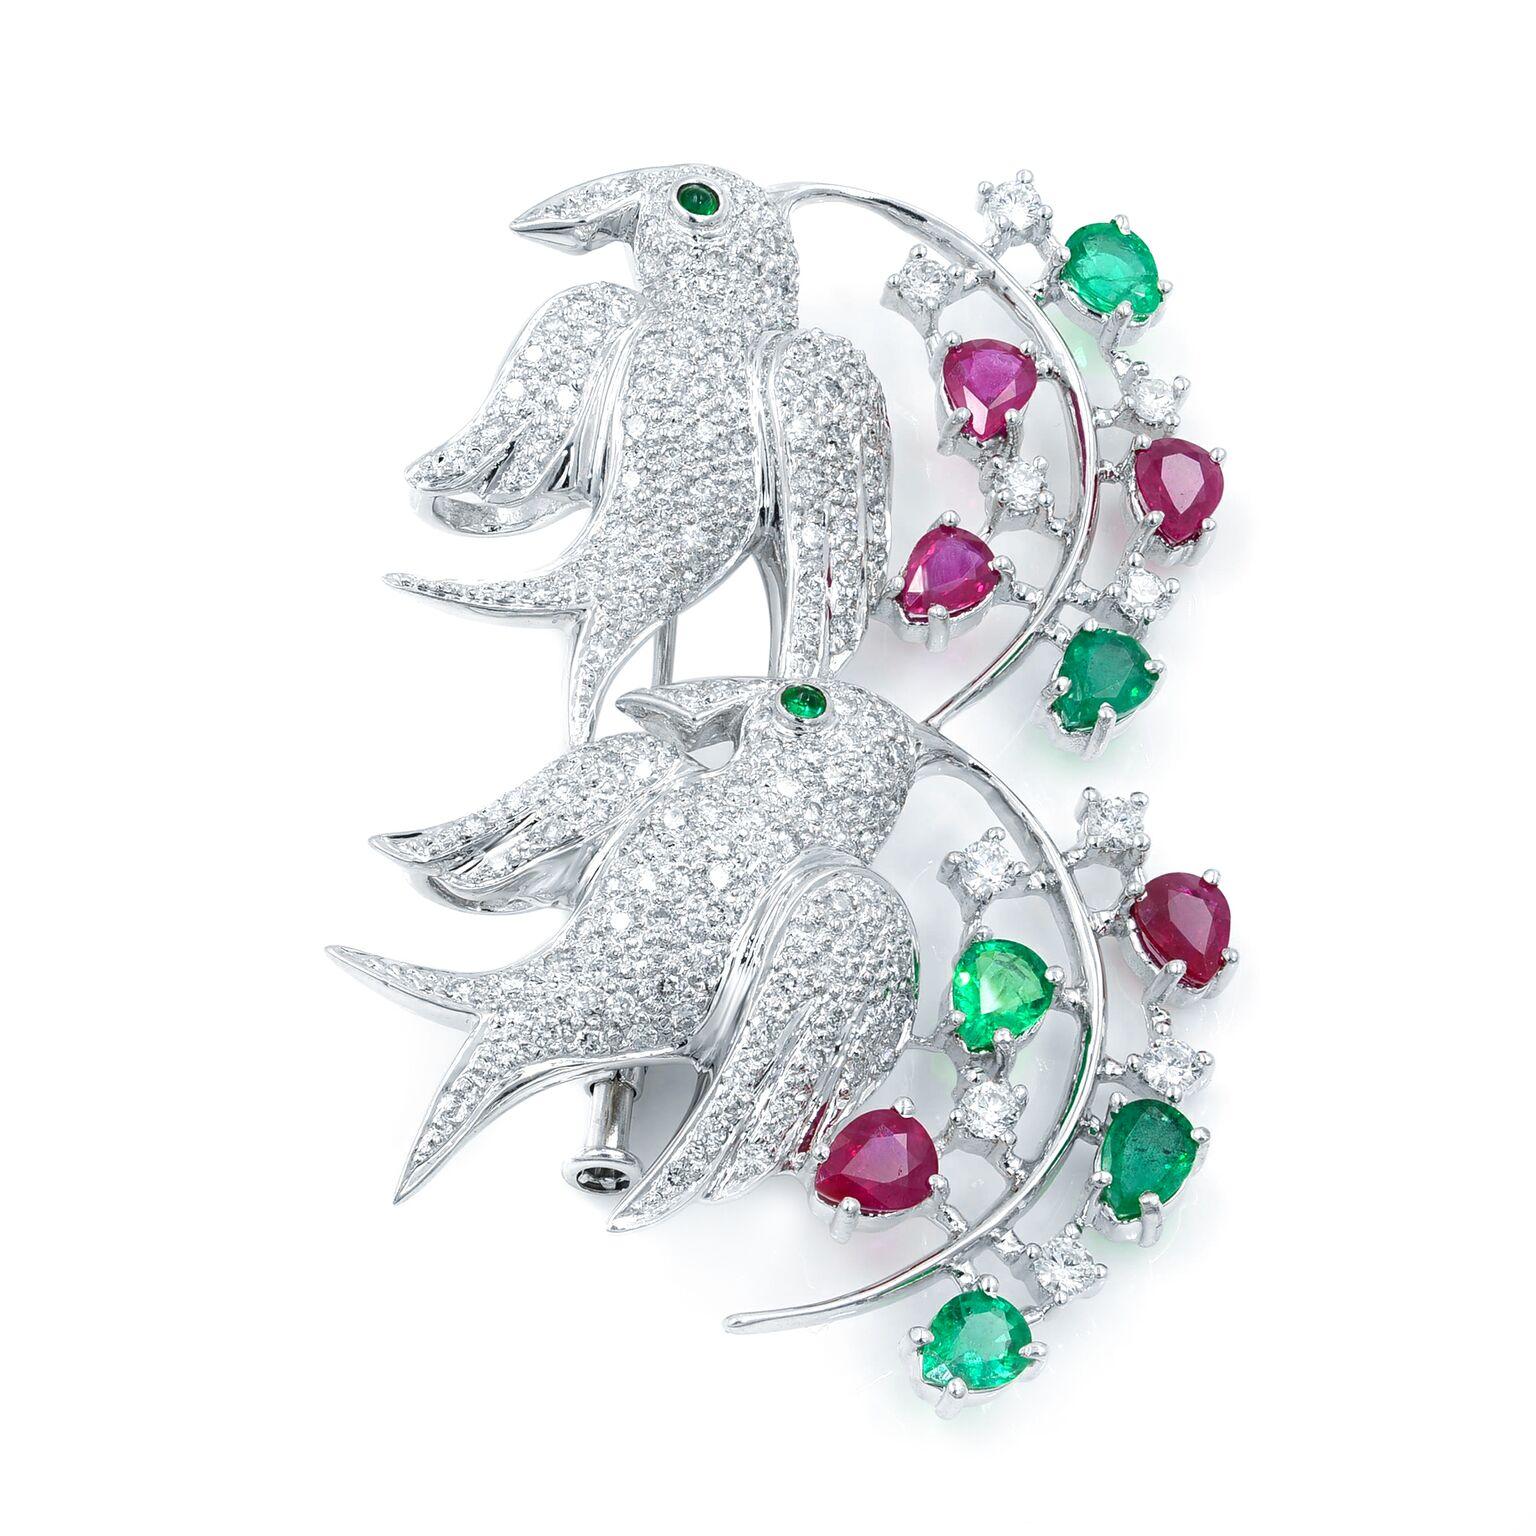 Pear Cut Emerald 1.56Cttw Ruby 2.04Cttw Diamond 1.92Cttw Brooch 18K White Gold For Sale